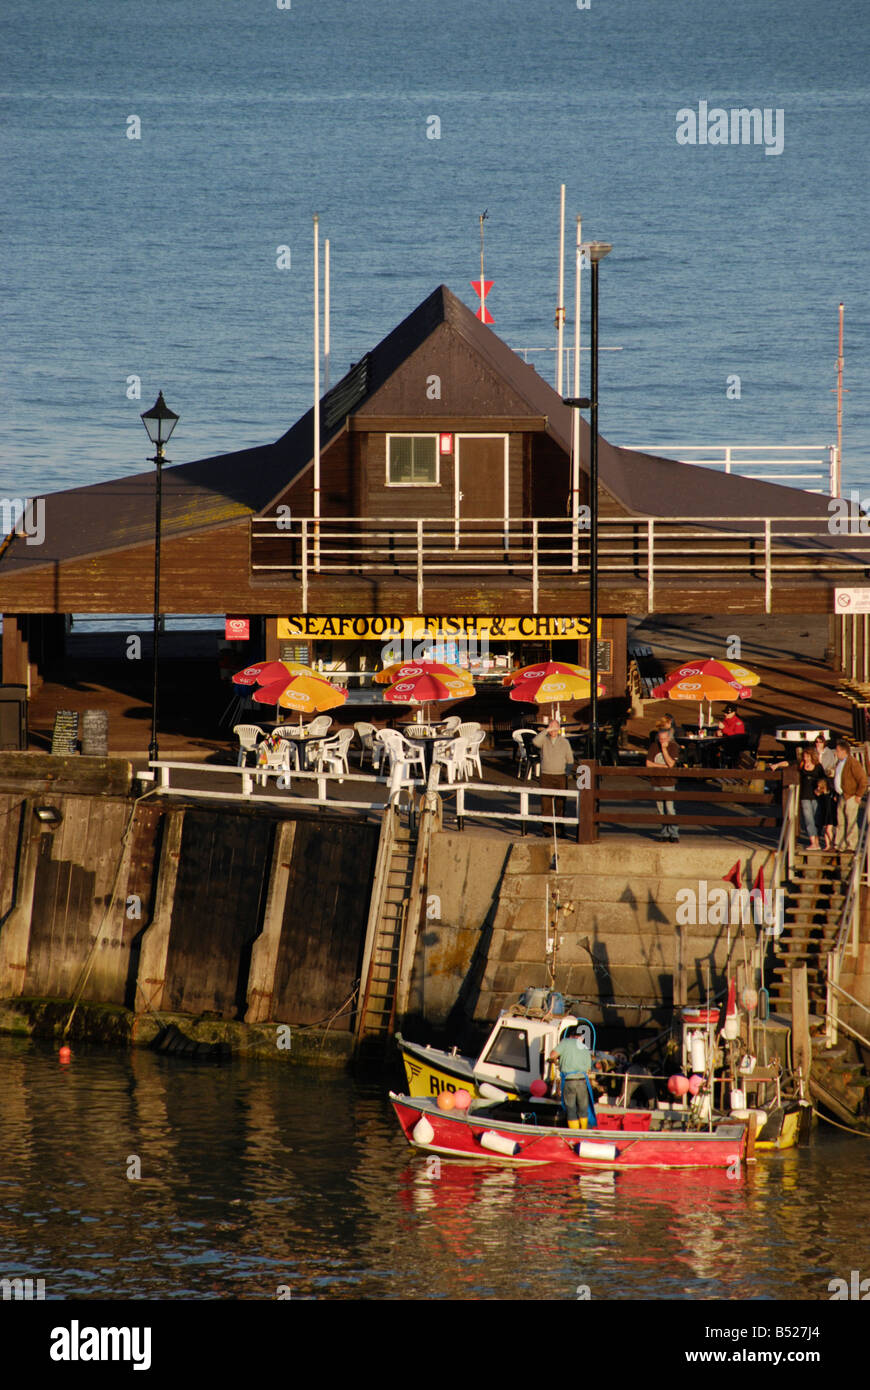 Seafood restaurant and fishing boats in Viking Harbour Broadstairs Kent England Stock Photo